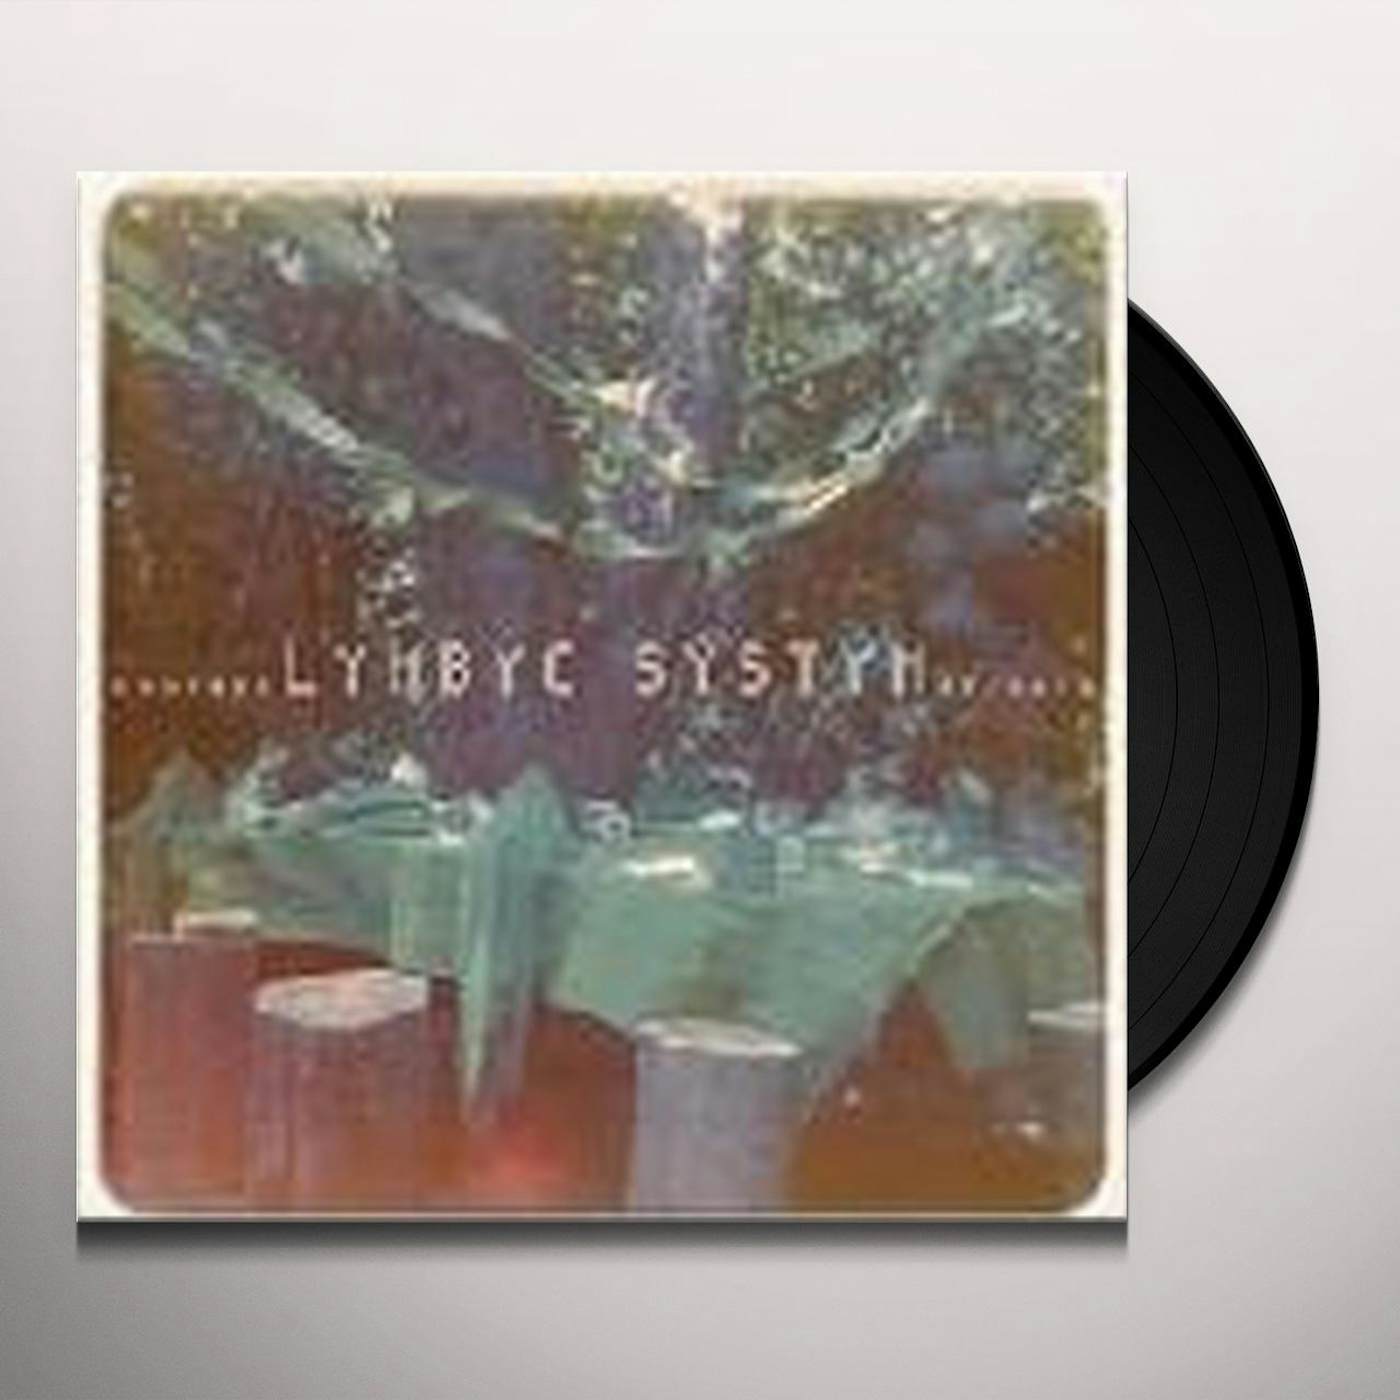 Lymbyc Systym SHUTTER RELEASE Vinyl Record